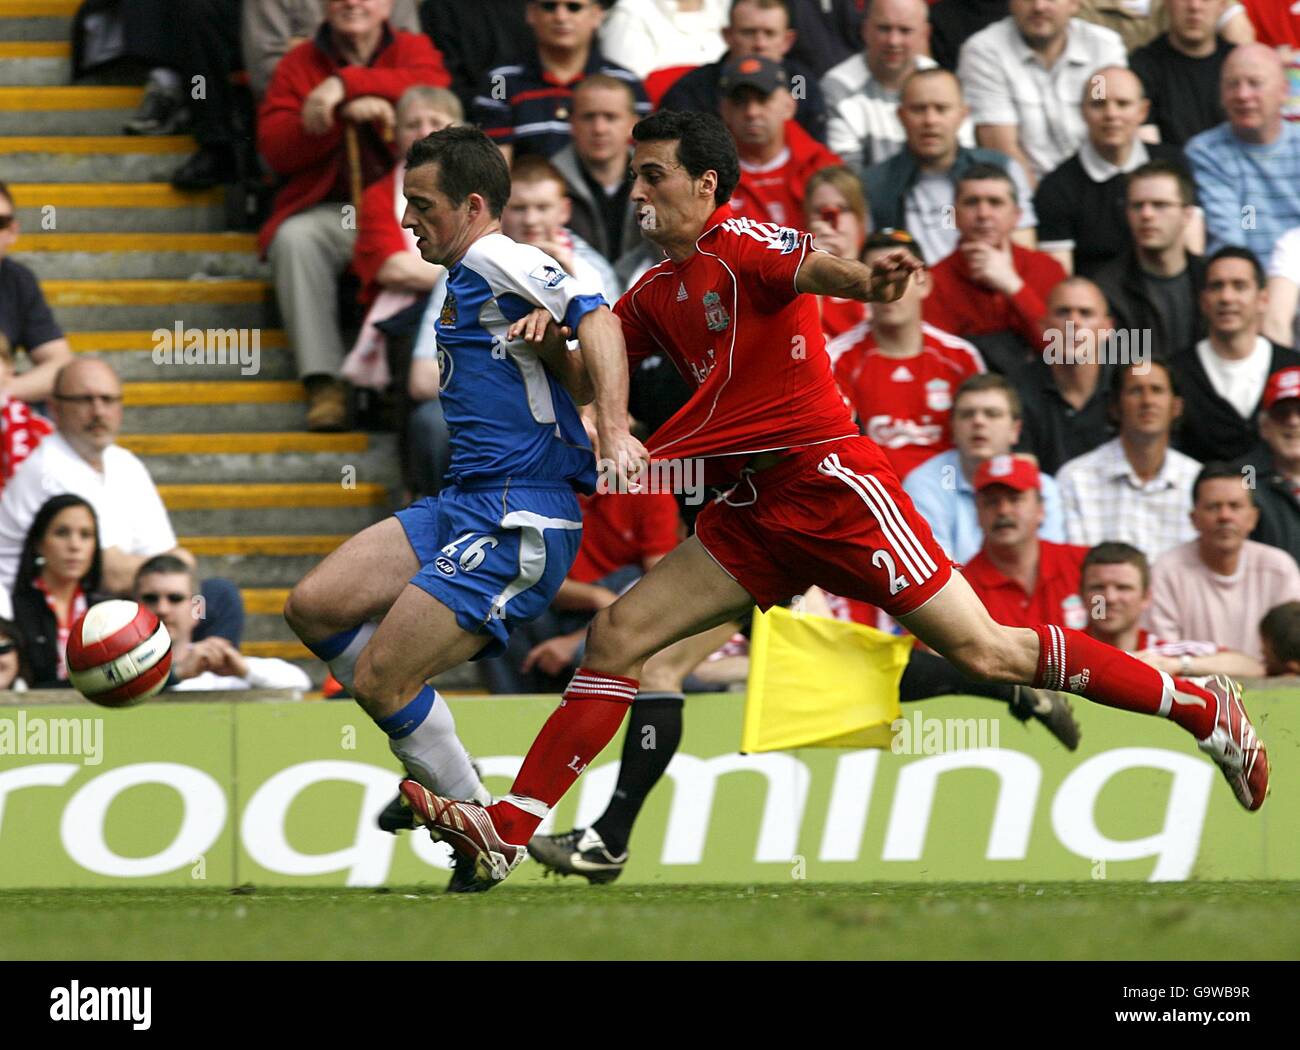 Soccer - FA Barclays Premiership - Liverpool v Wigan Athletic - Anfield. Wigan Athletic's Leighton Baines (l) and Liverpool's Alvaro Arbeloa (r) battle for the ball Stock Photo